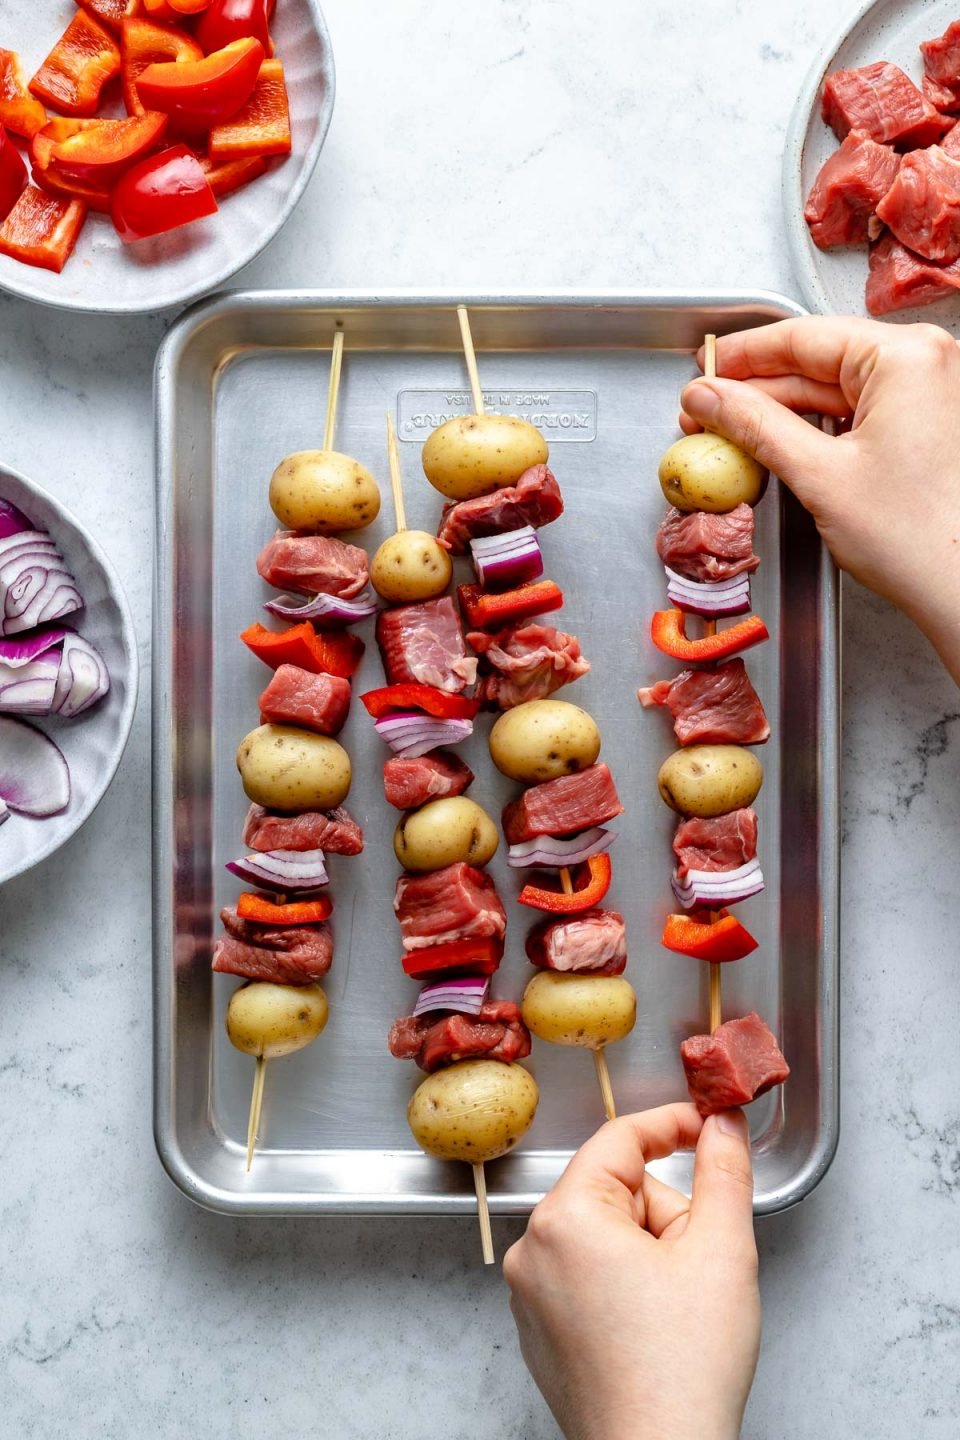 Chimichurri steak and potato kabobs assembly: A woman's hands shown threading steak onto a bamboo skewer with bell peppers, onions, & potatoes. 3 assembled skewers sit atop a small baking sheet on a light blue marbled surface.